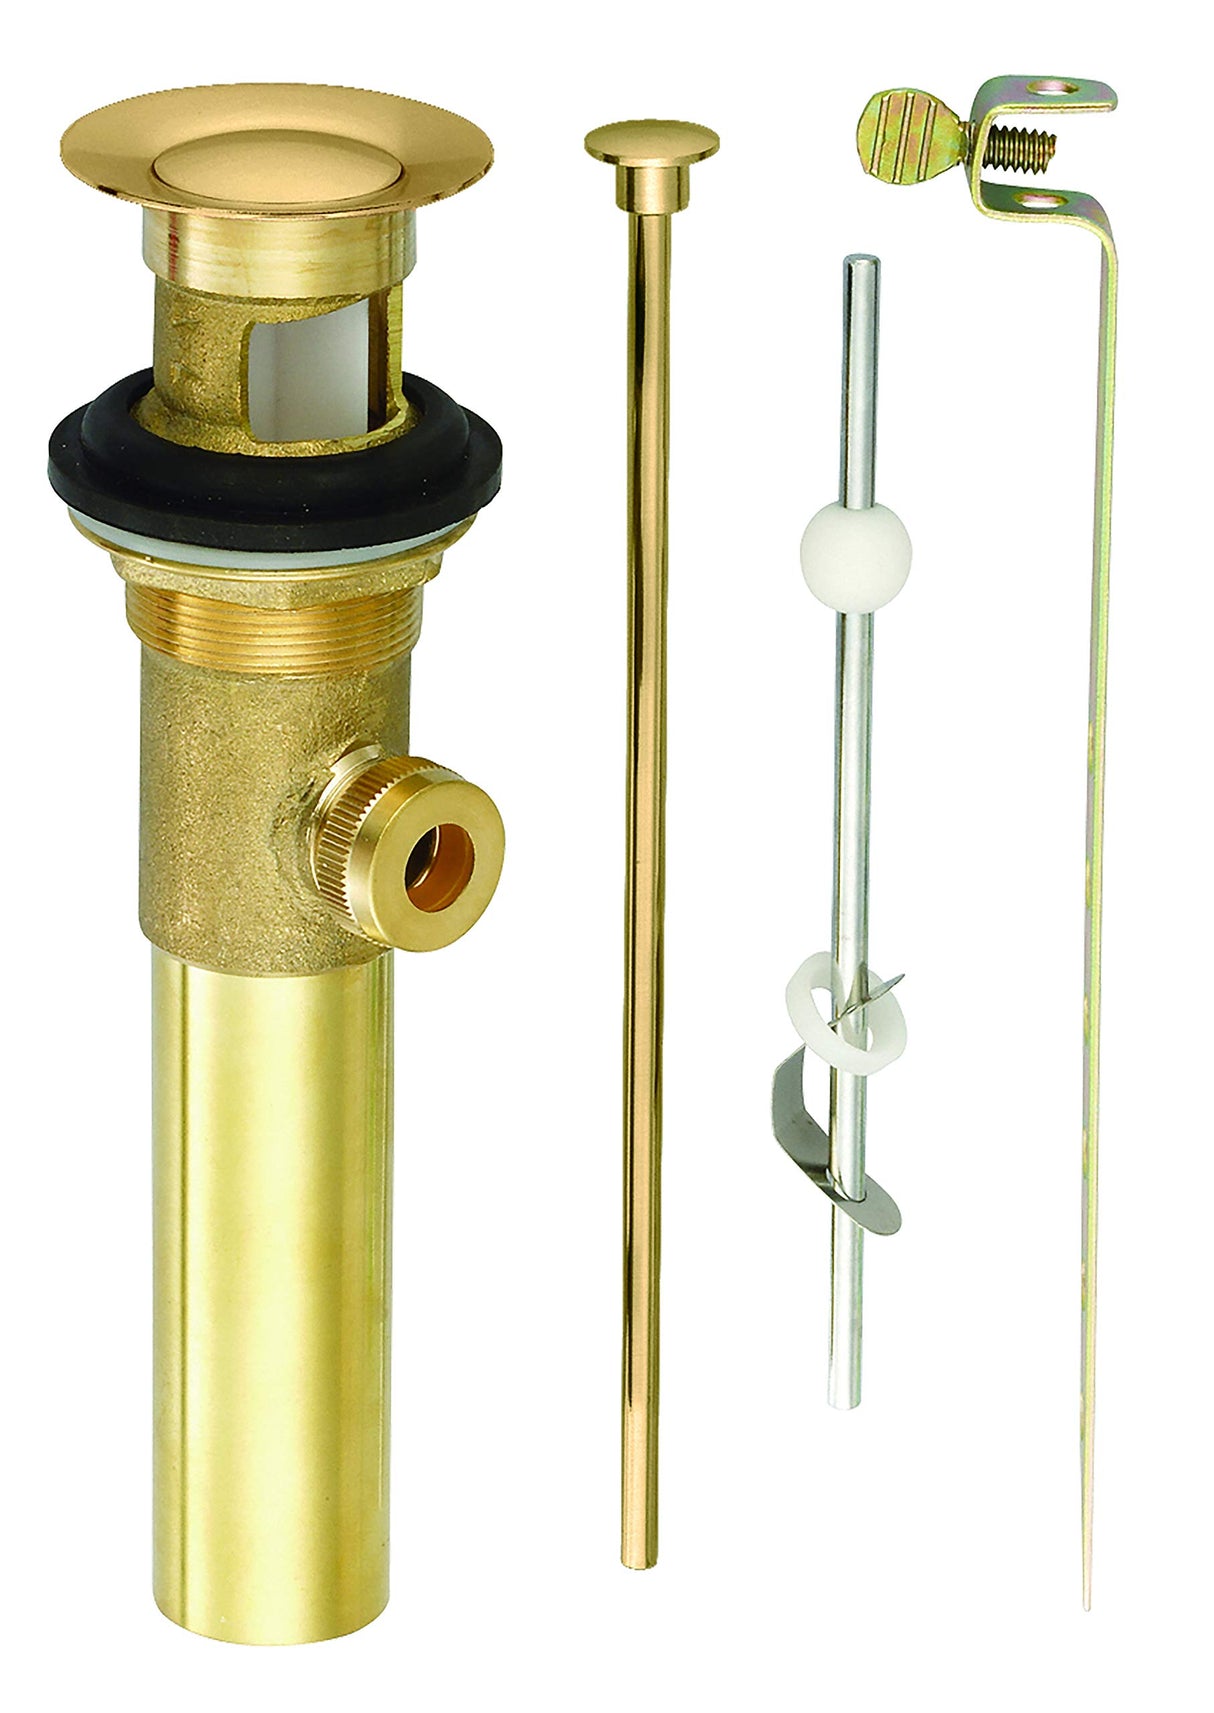 Gerber D495002BB Brushed Bronze 1 1/4" Metal Pop-up Drain Assembly With Lift Rod